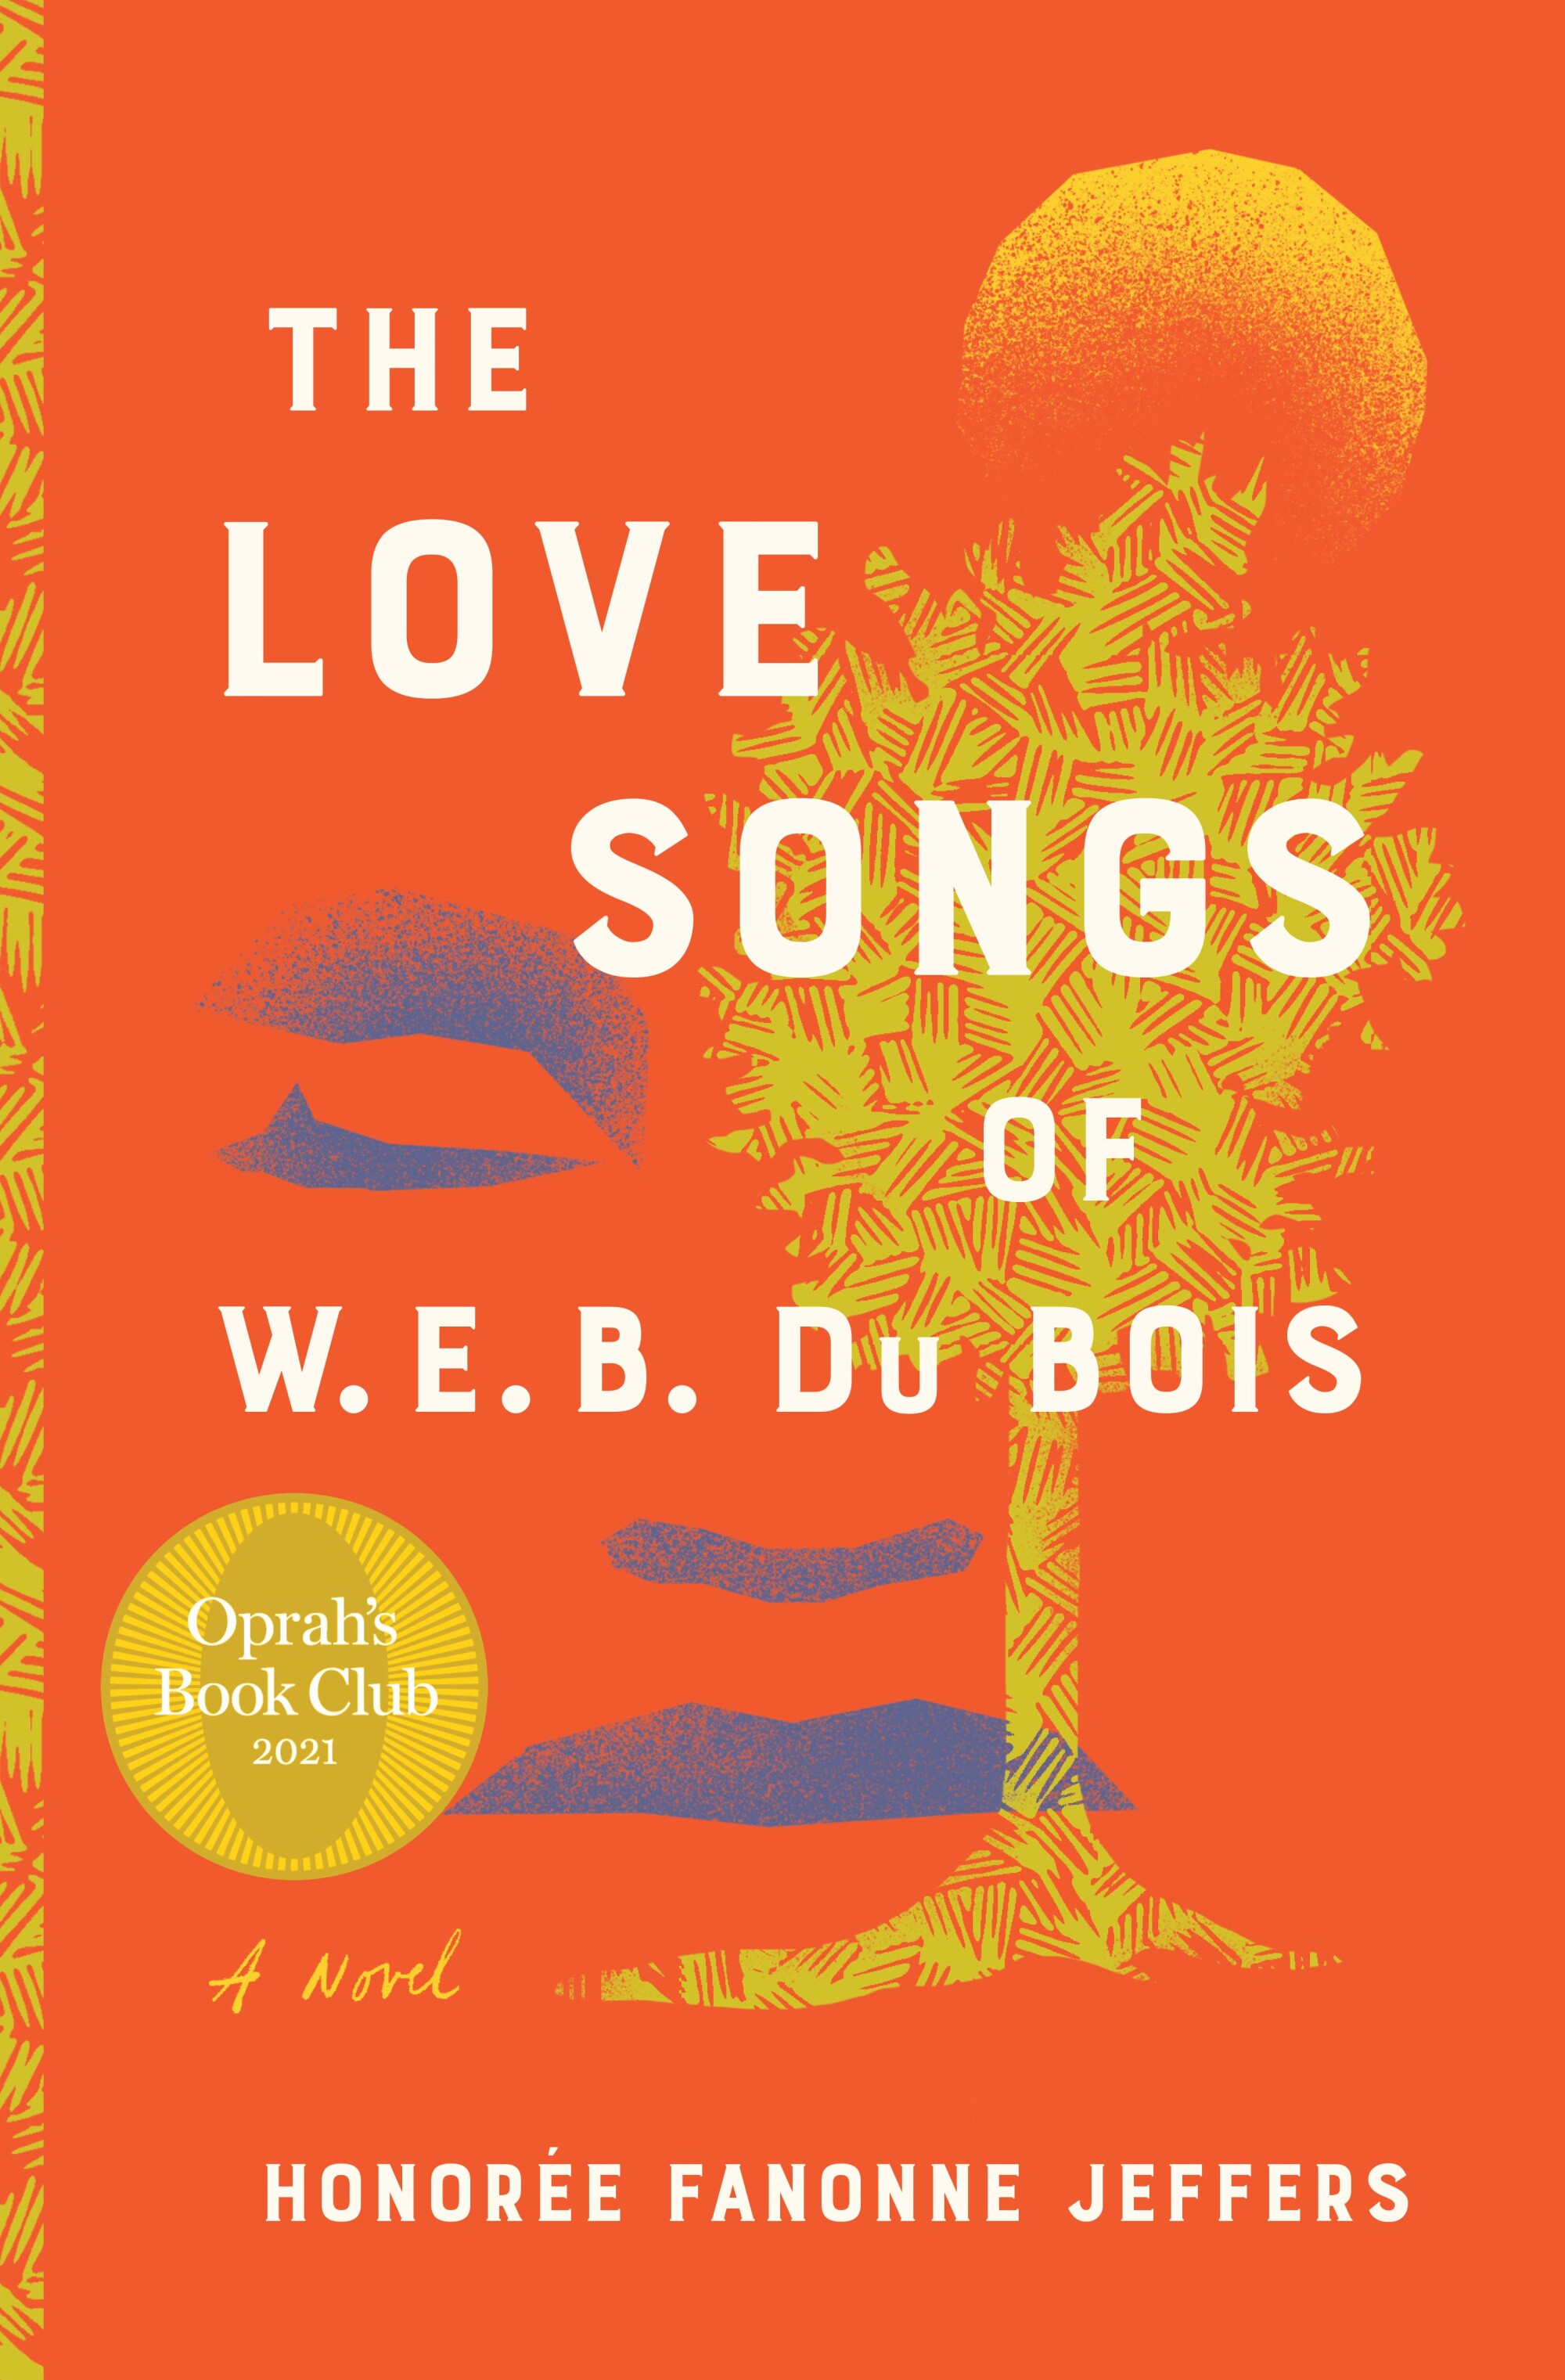 An image of a face and a tree on the cover of "The Love Songs of WEB Du Bois," by Honoree Fanonne Jeffers